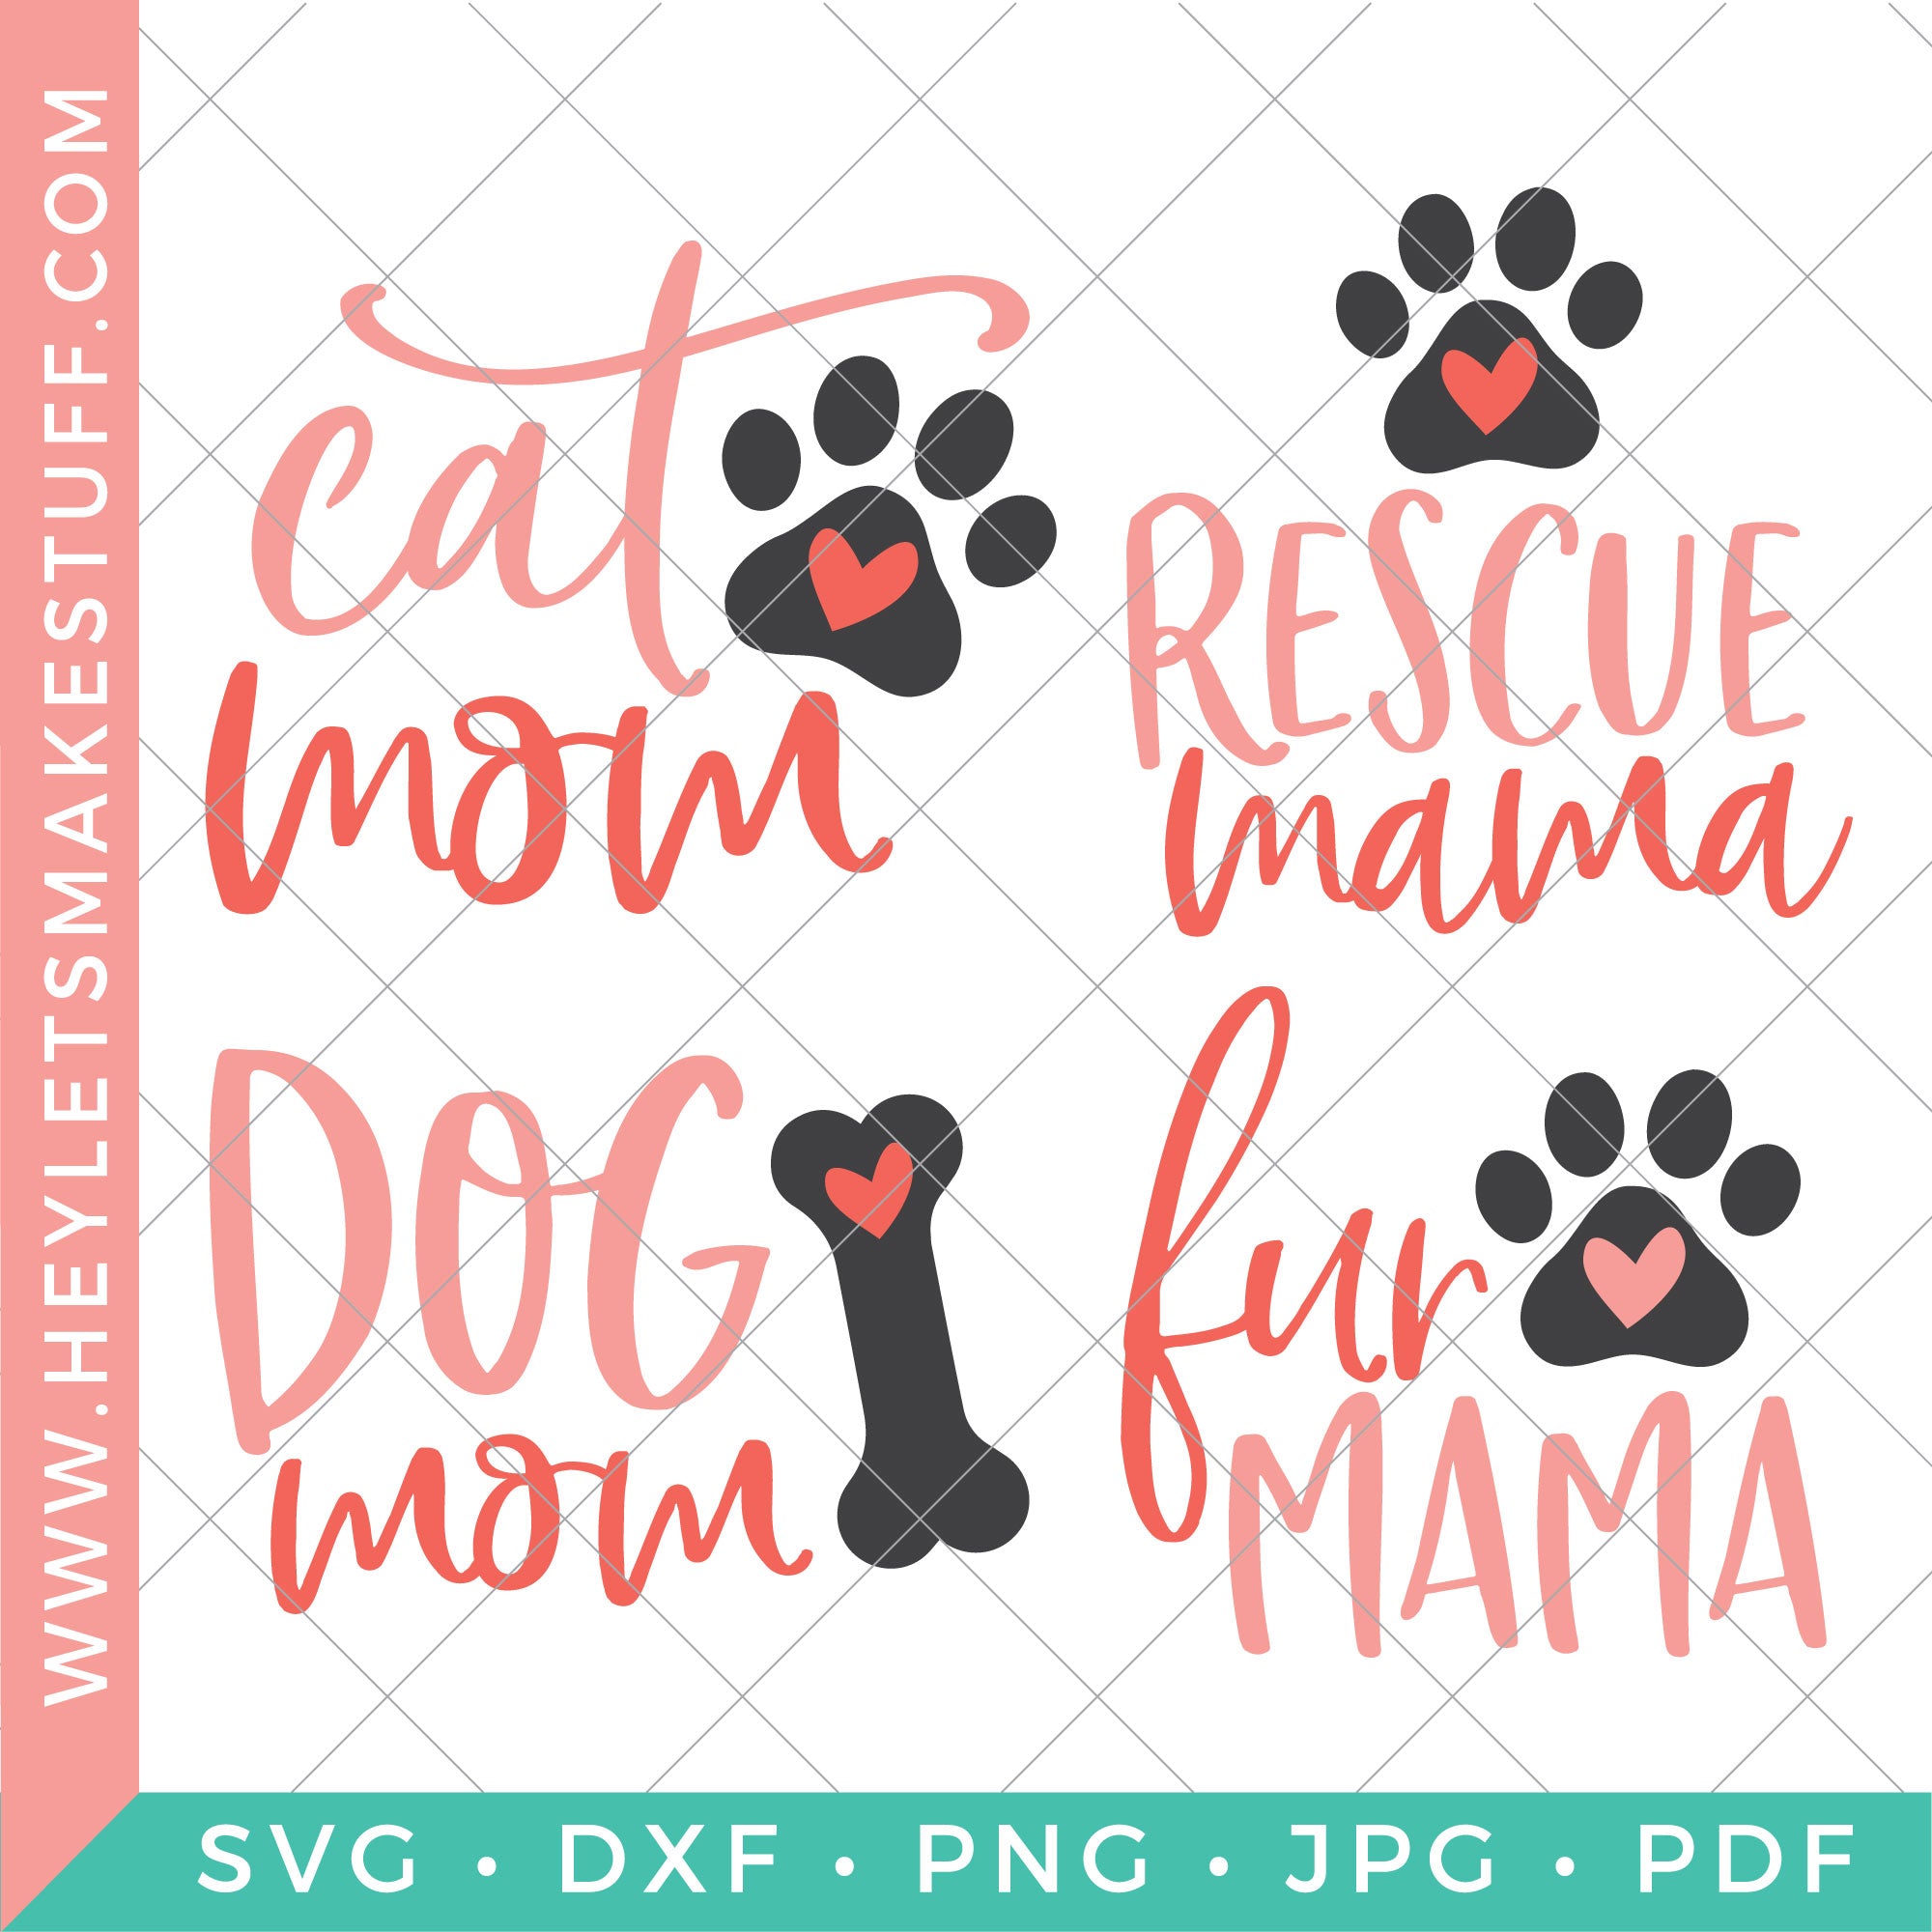 Download Cat And Dog Mom Cut Files Clip Art Hey Let S Make Stuff